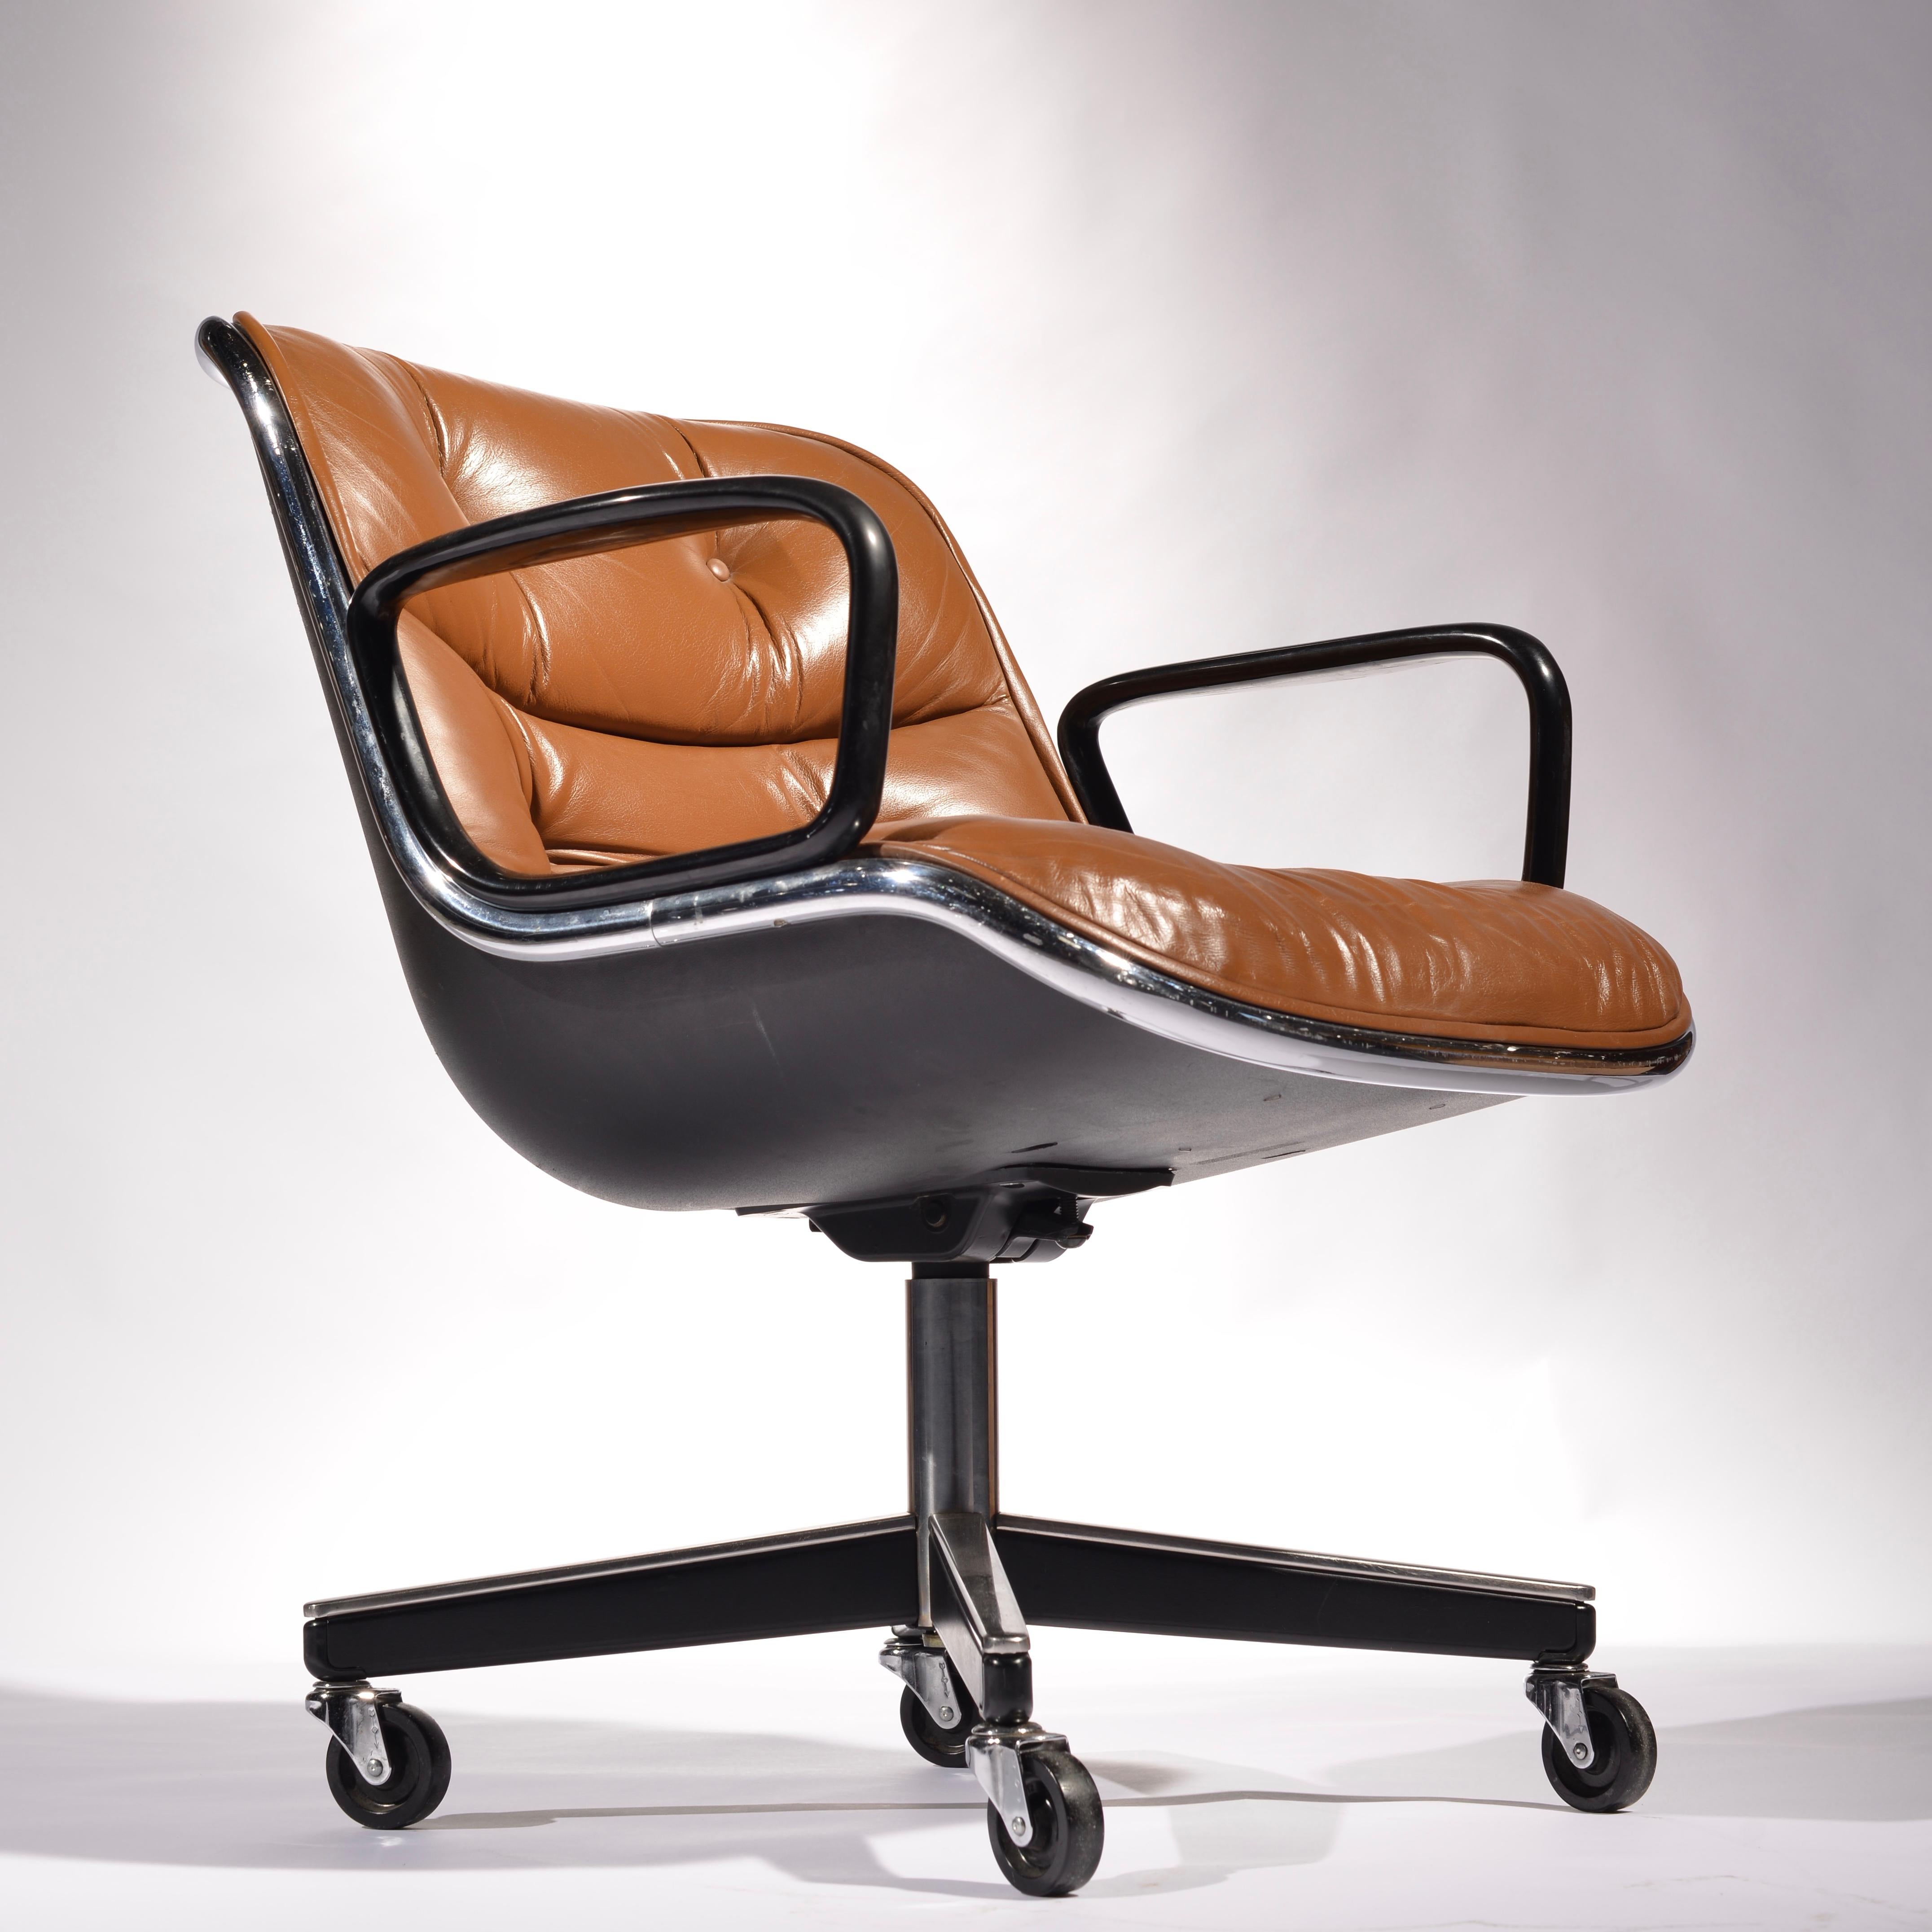 We have 20 vintage Charles Pollock executive desk chair for Knoll in the rare and amazing cognac leather. The ultimate ergonomic, office desk chair designed by this George Nelson apprentice, Charles Pollock. Chairs are adjustable. Priced per item.